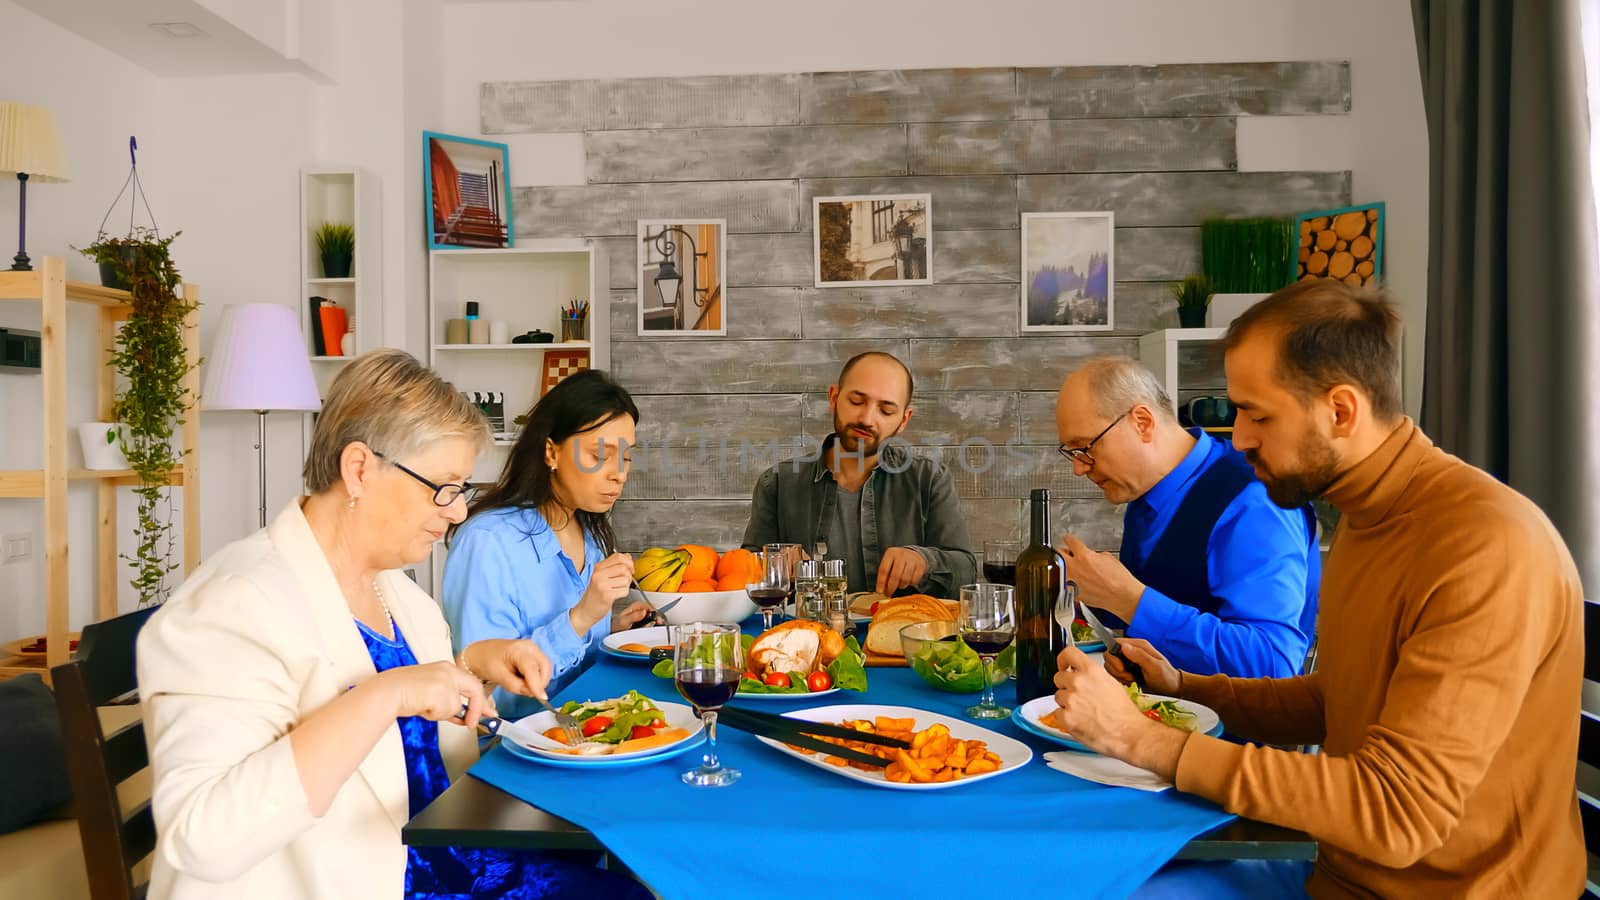 Zoom out shot of family enjoying delicious meal by DCStudio